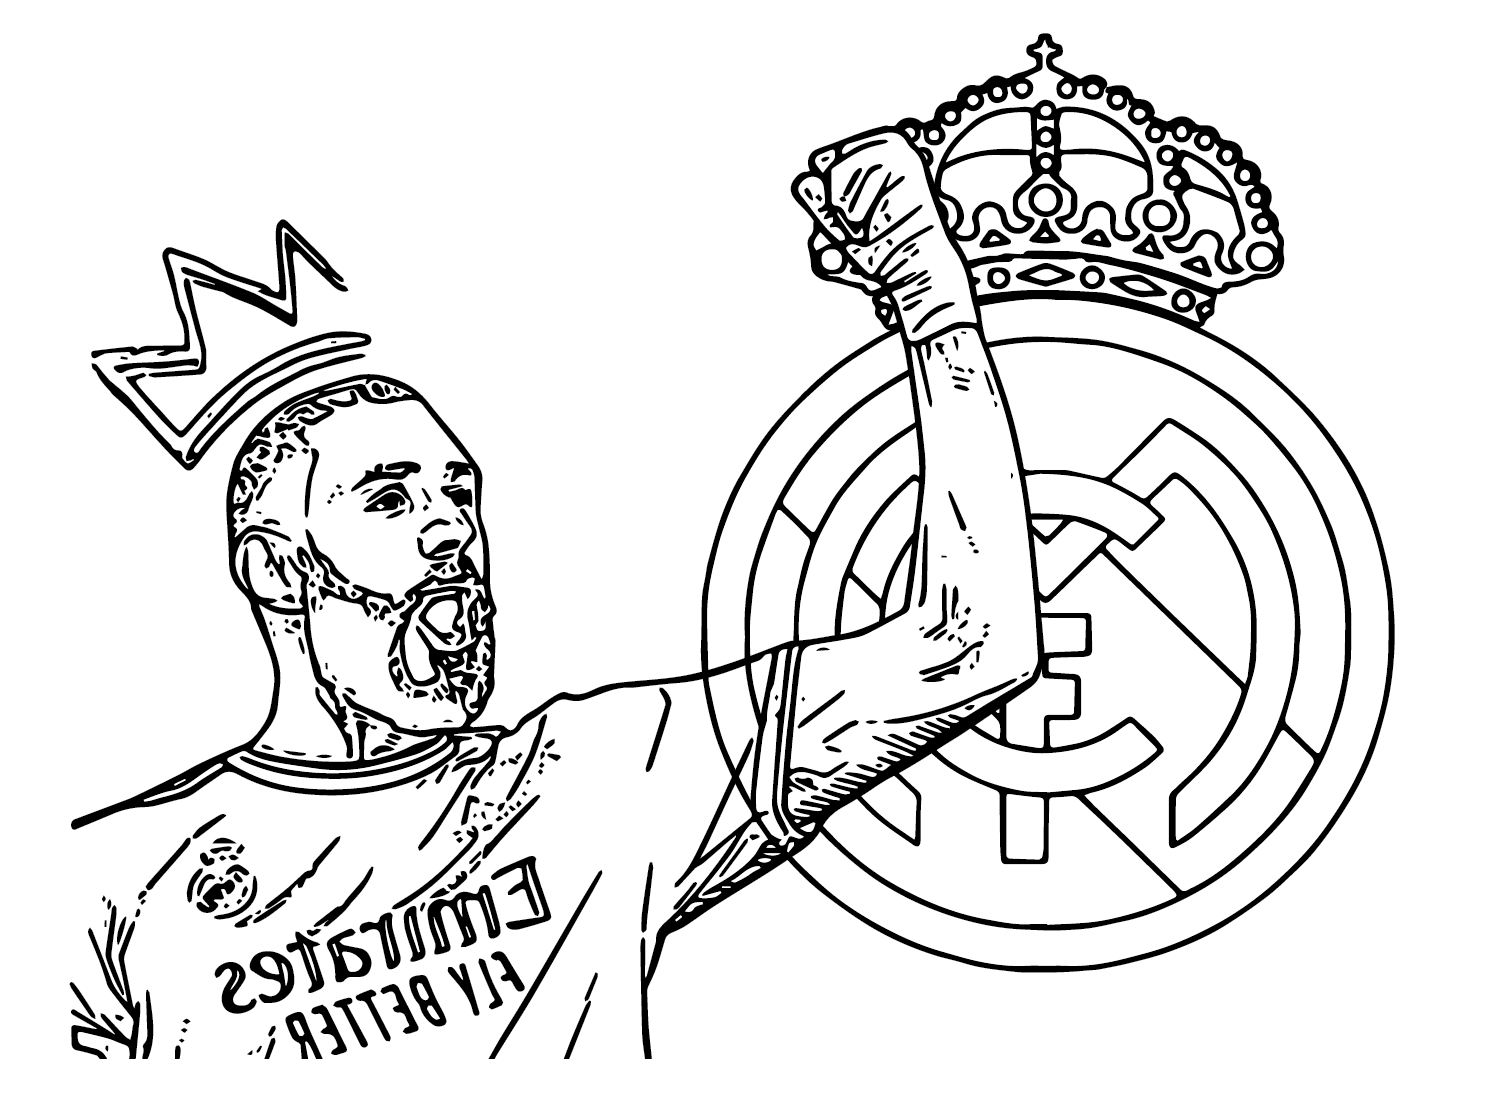 Karim Benzema to Color Coloring Page - Free Printable Coloring Pages